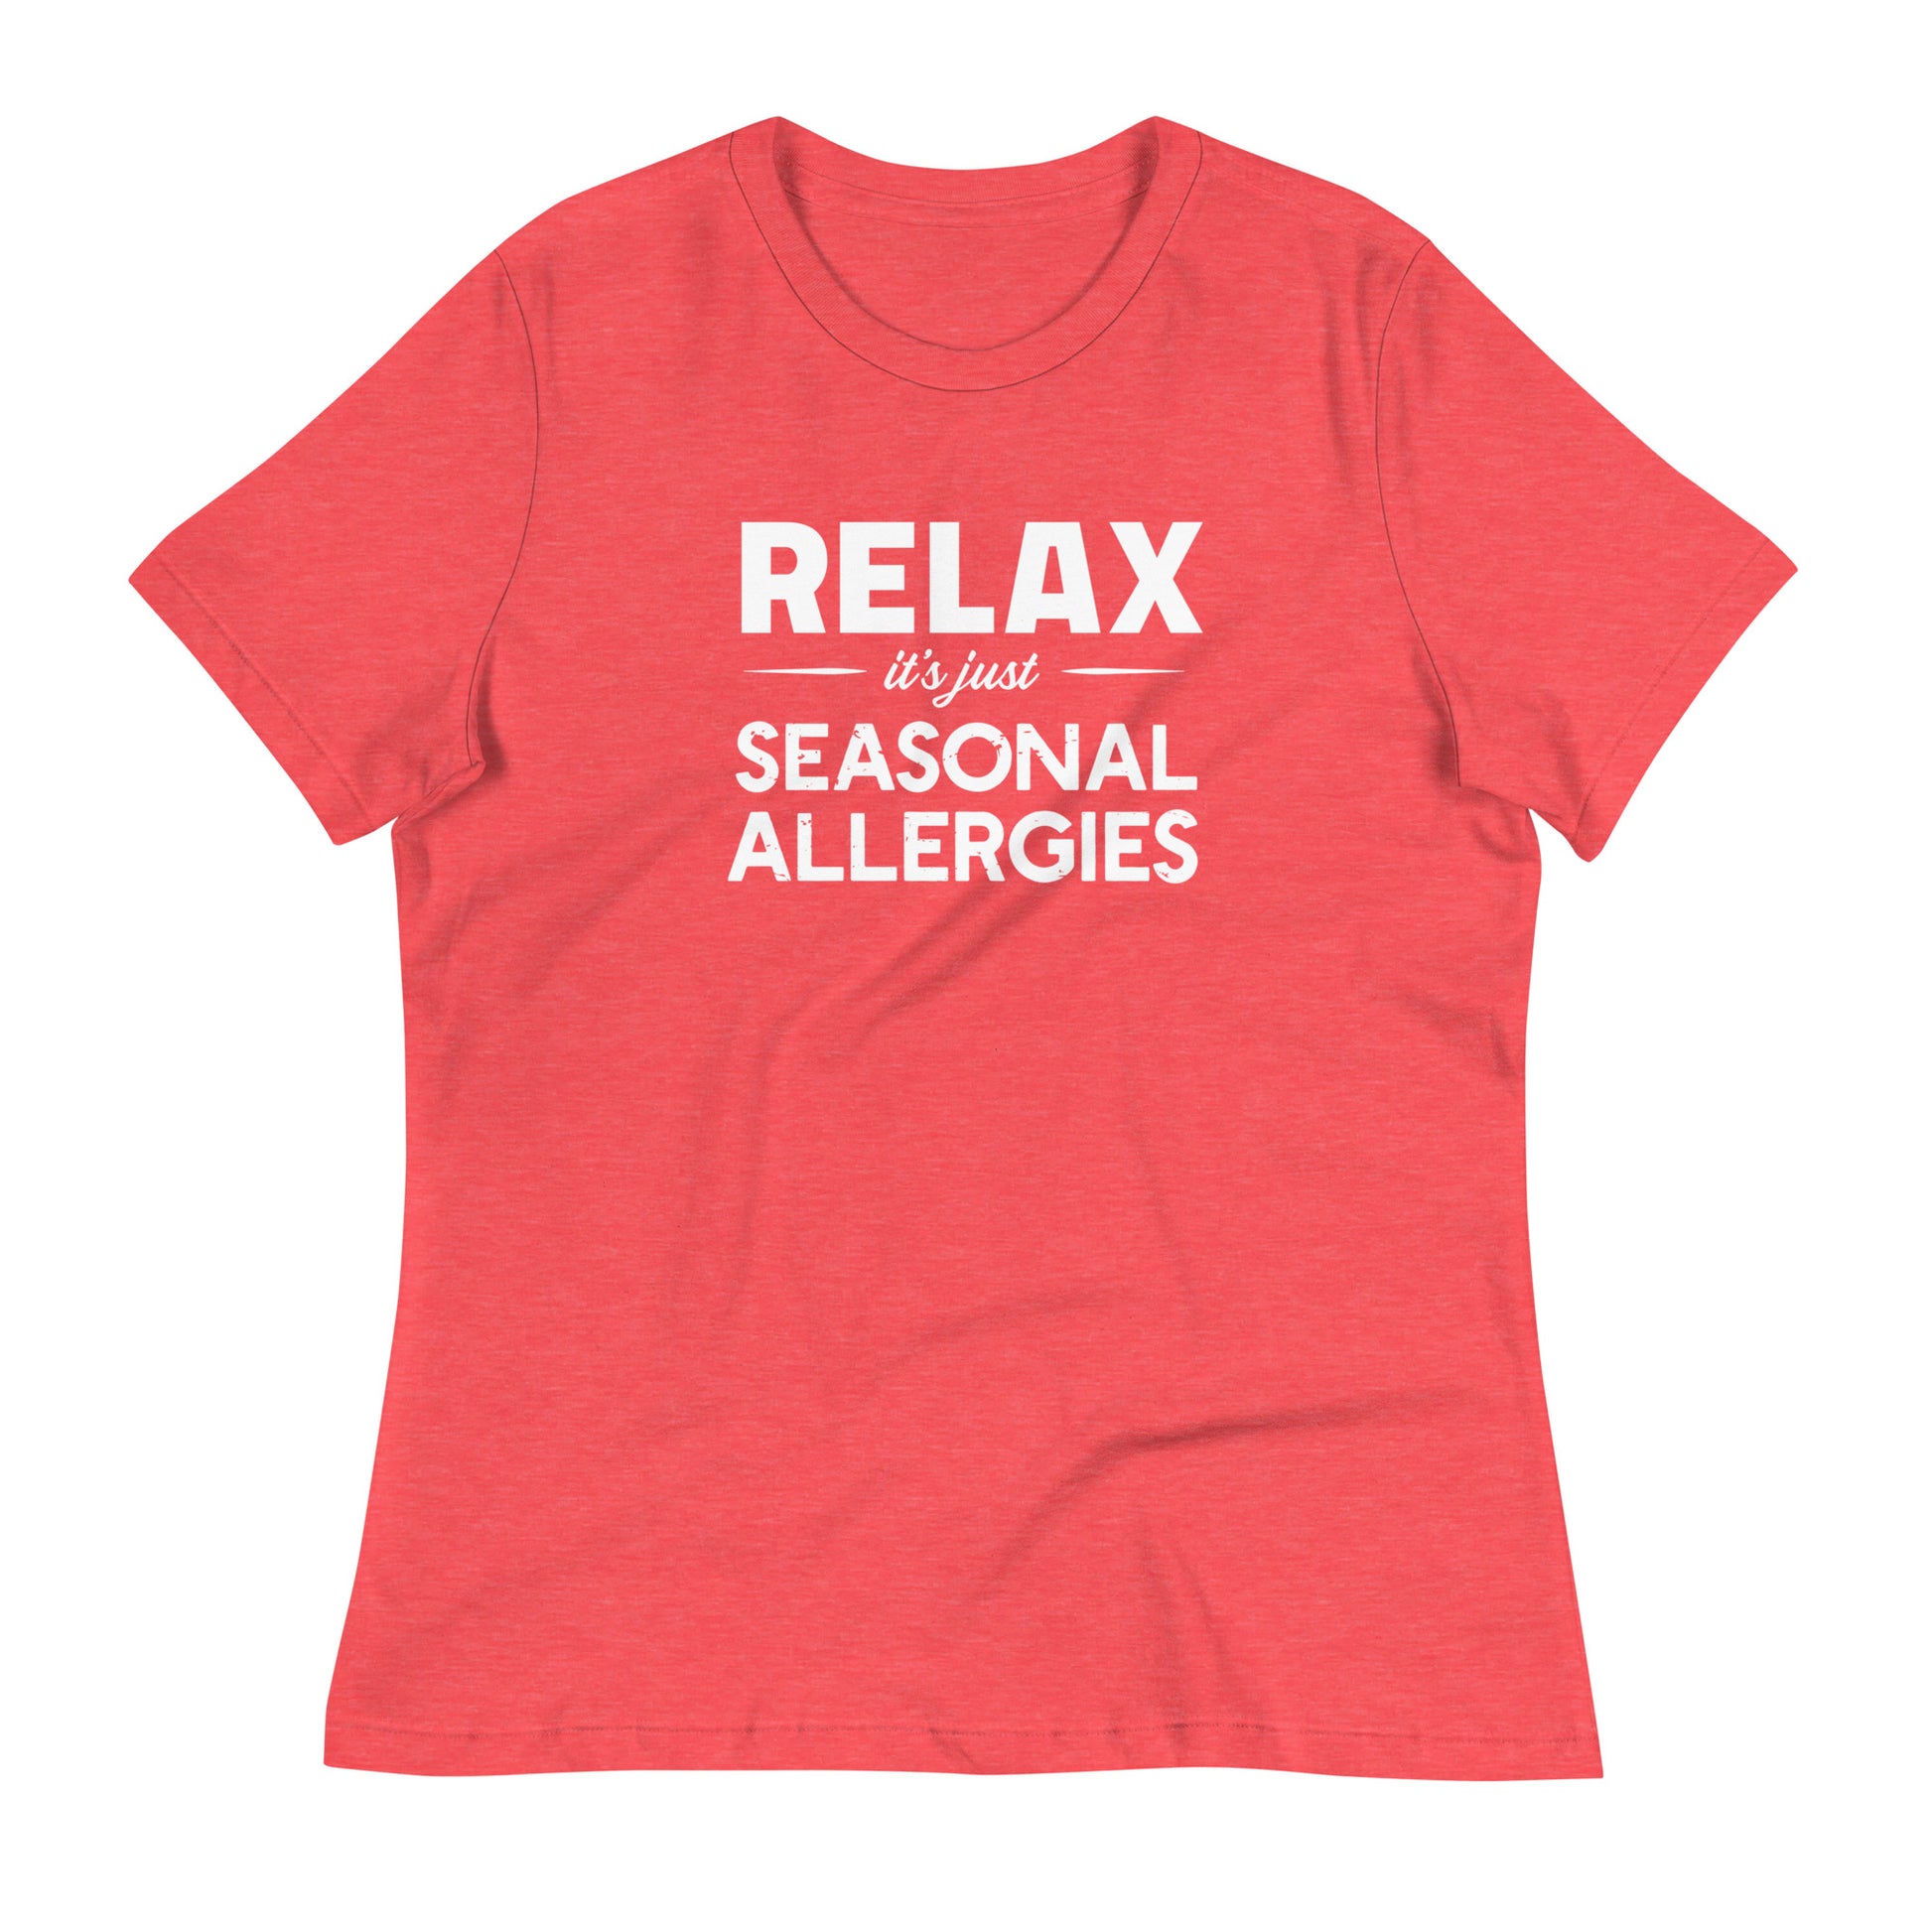 Heather Red women's relaxed fit t-shirt with white graphic: "RELAX it's just SEASONAL ALLERGIES"